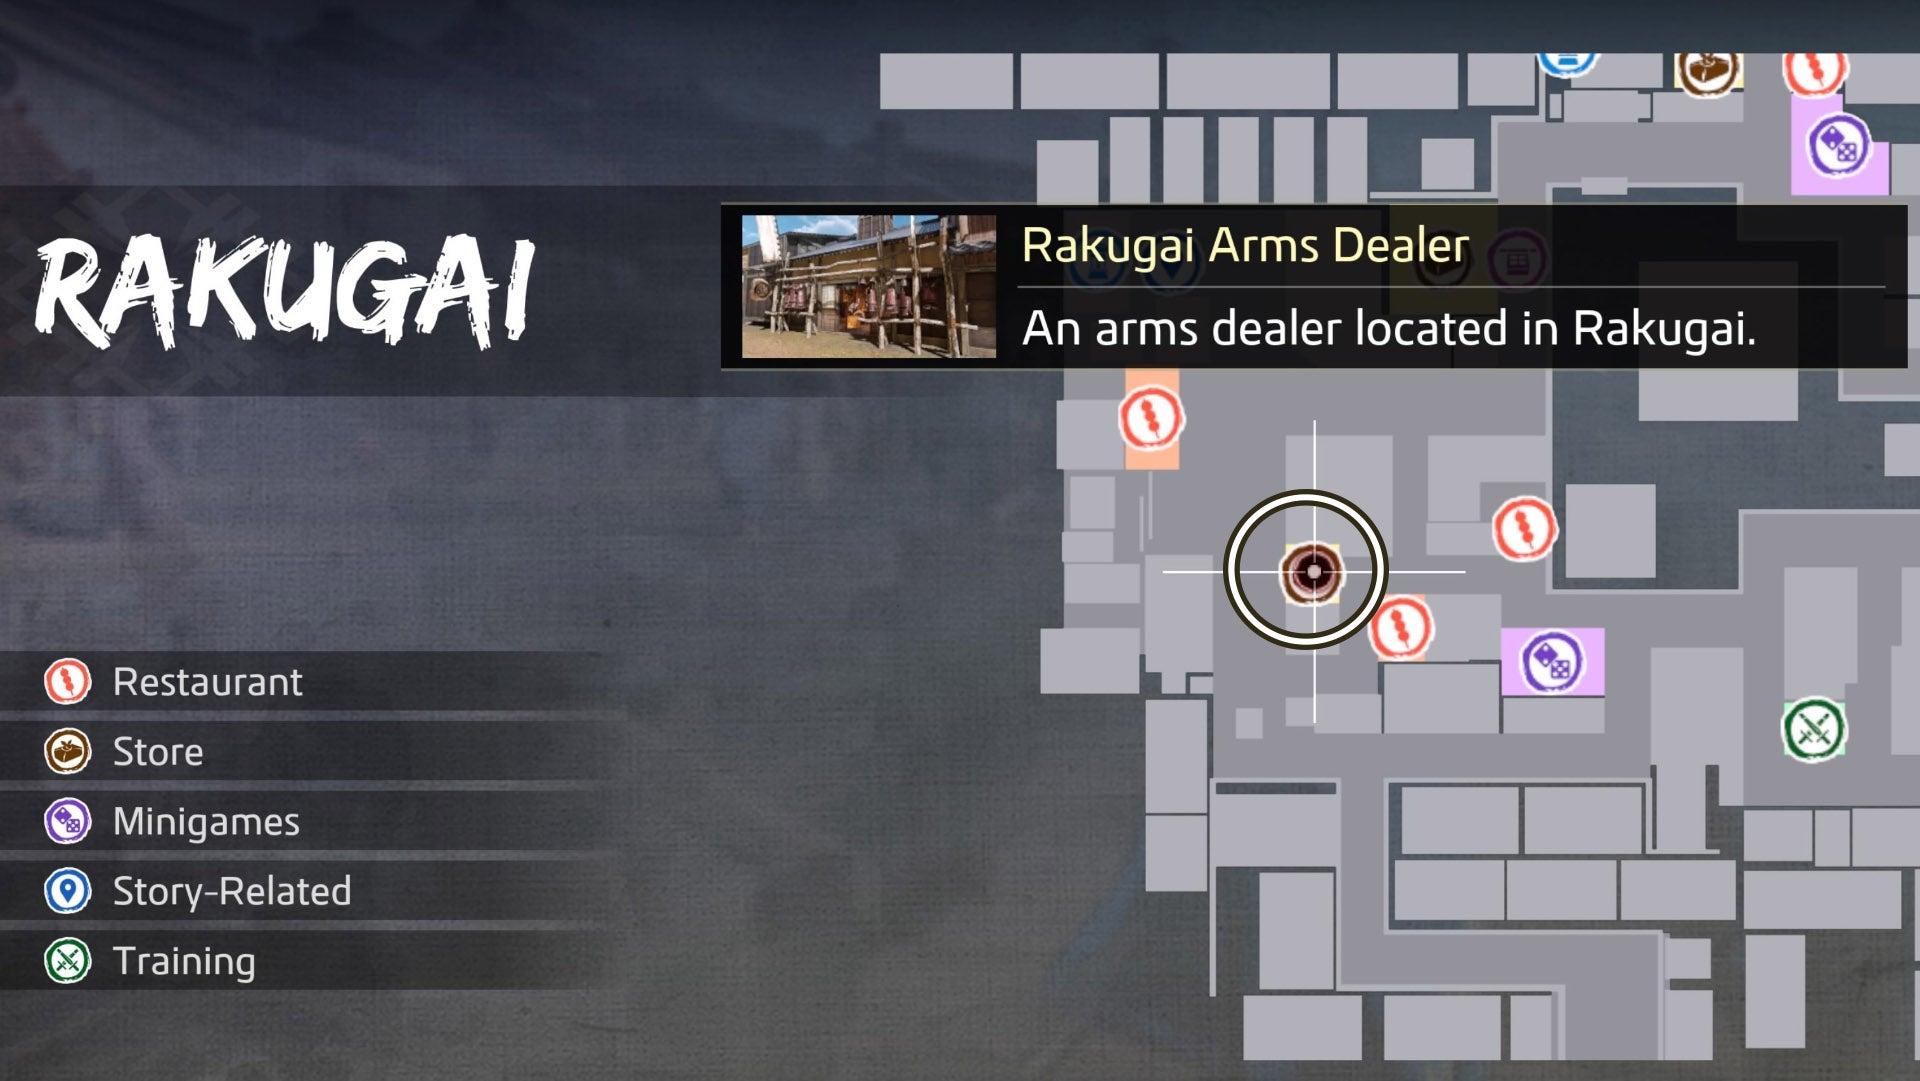 Like an Ishin dragon, the location of the Rakugai arms dealer has been circled on the map.